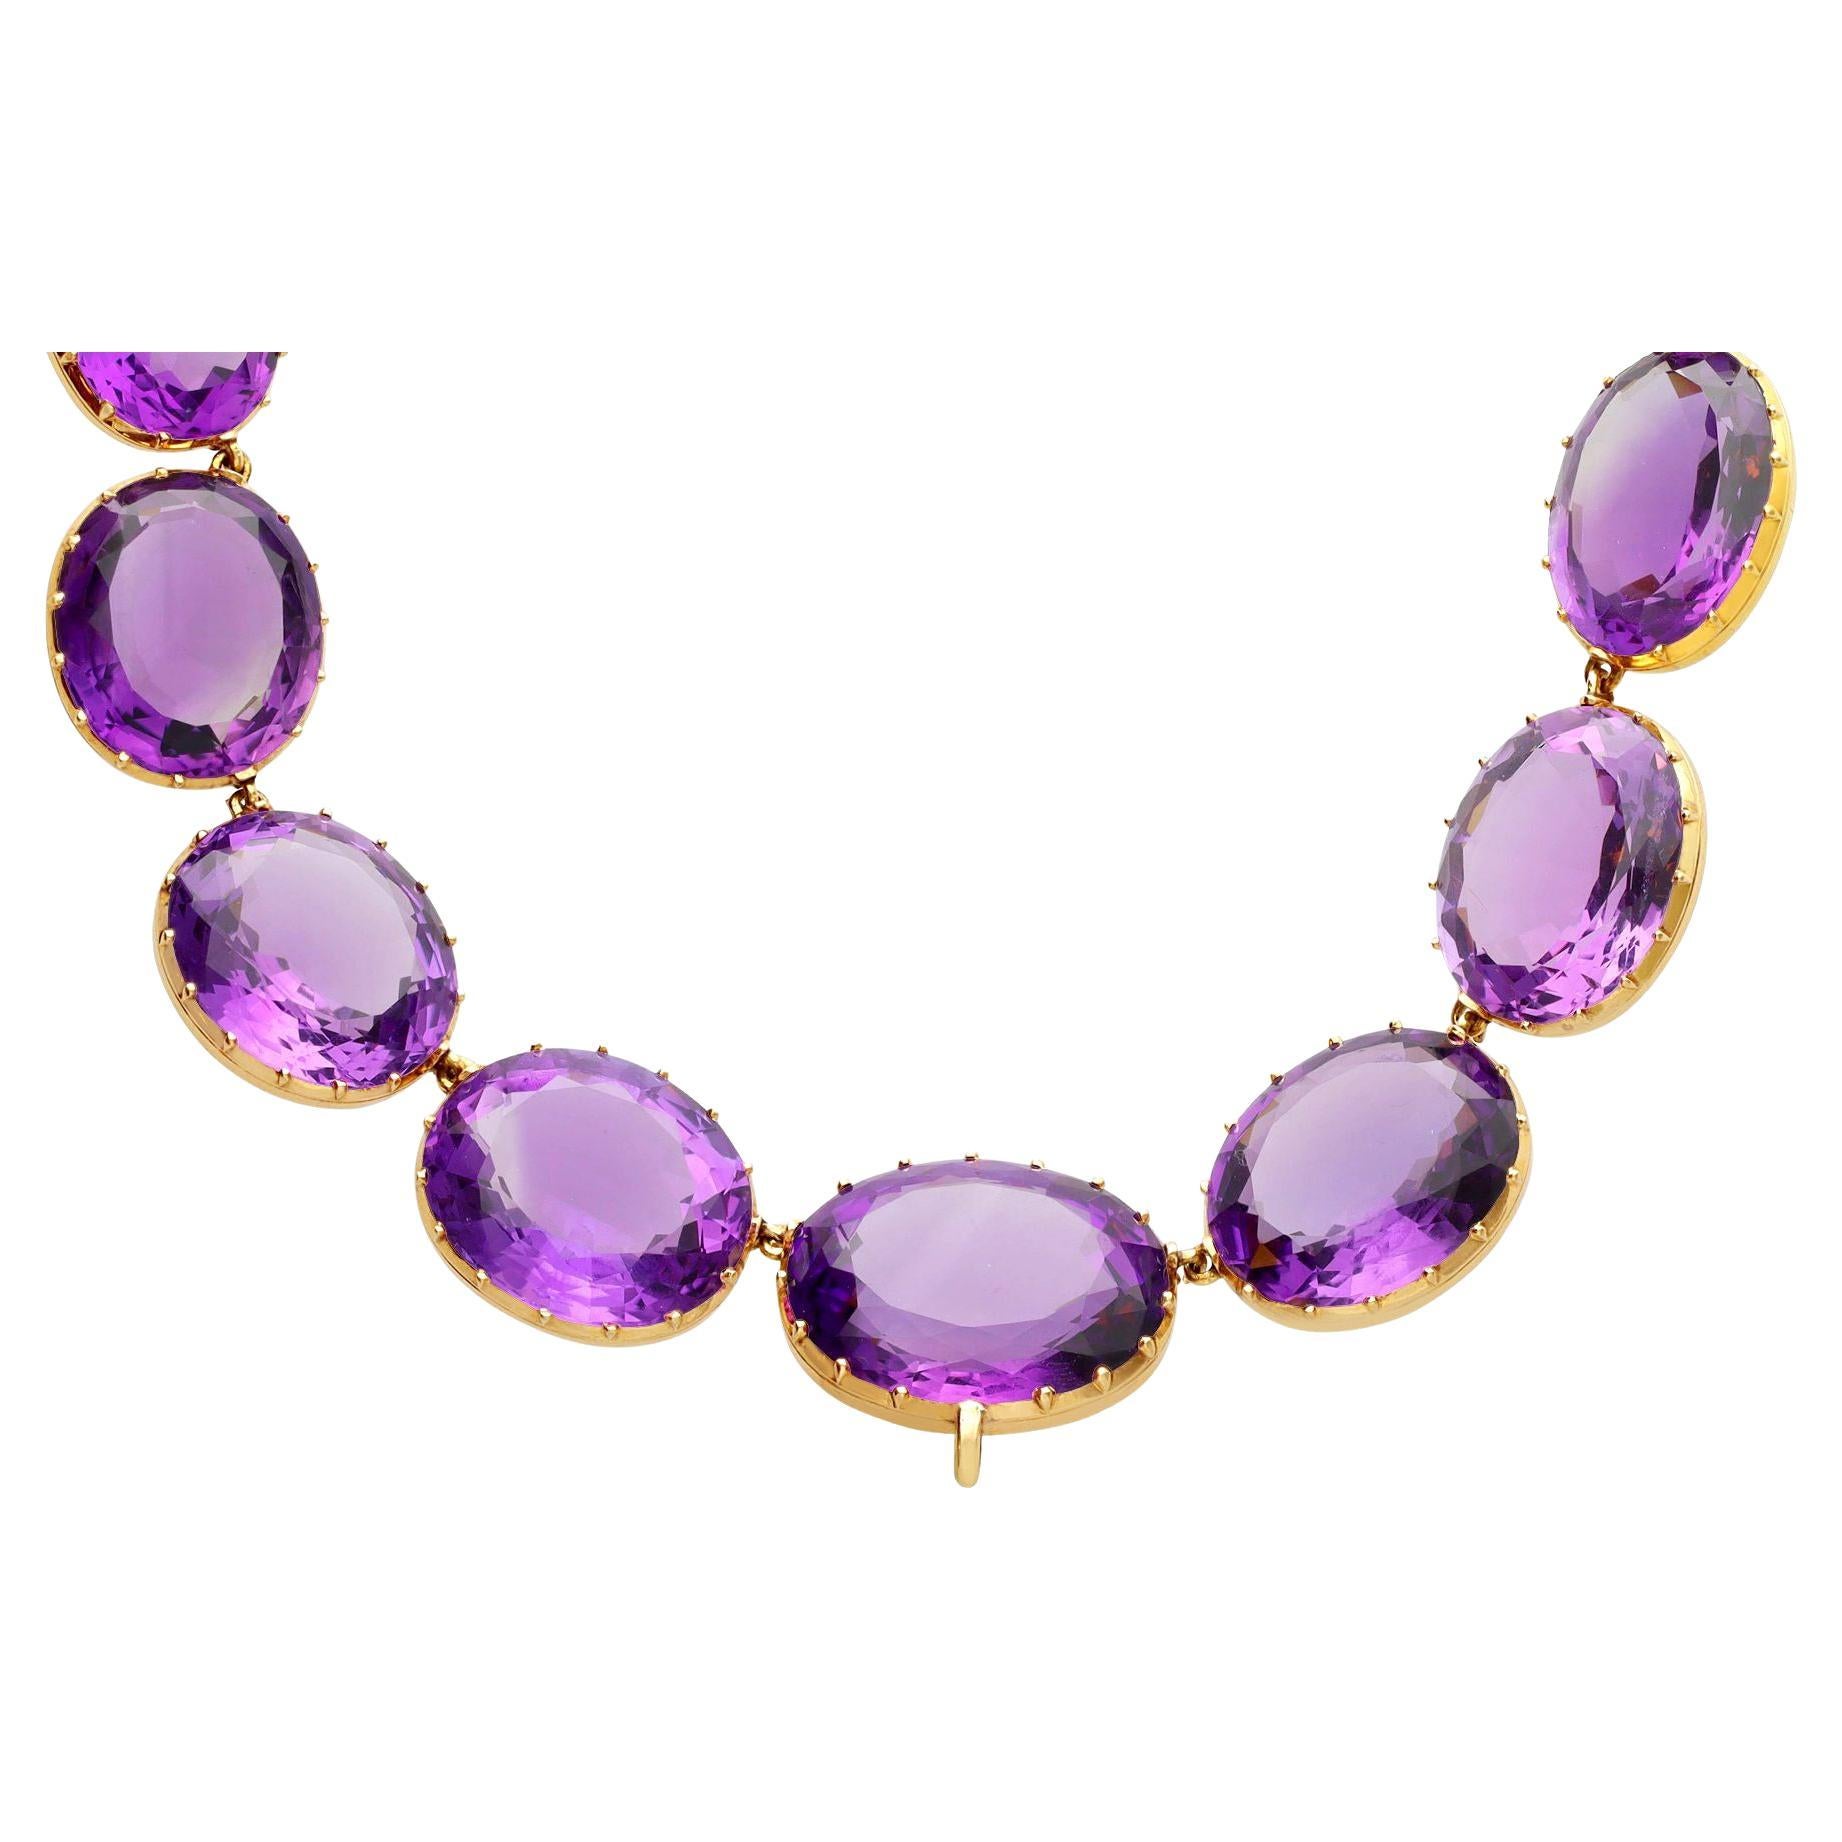 Antique 396.09 Carat Amethyst and 14K Yellow Gold Riviere / Collarette Necklace